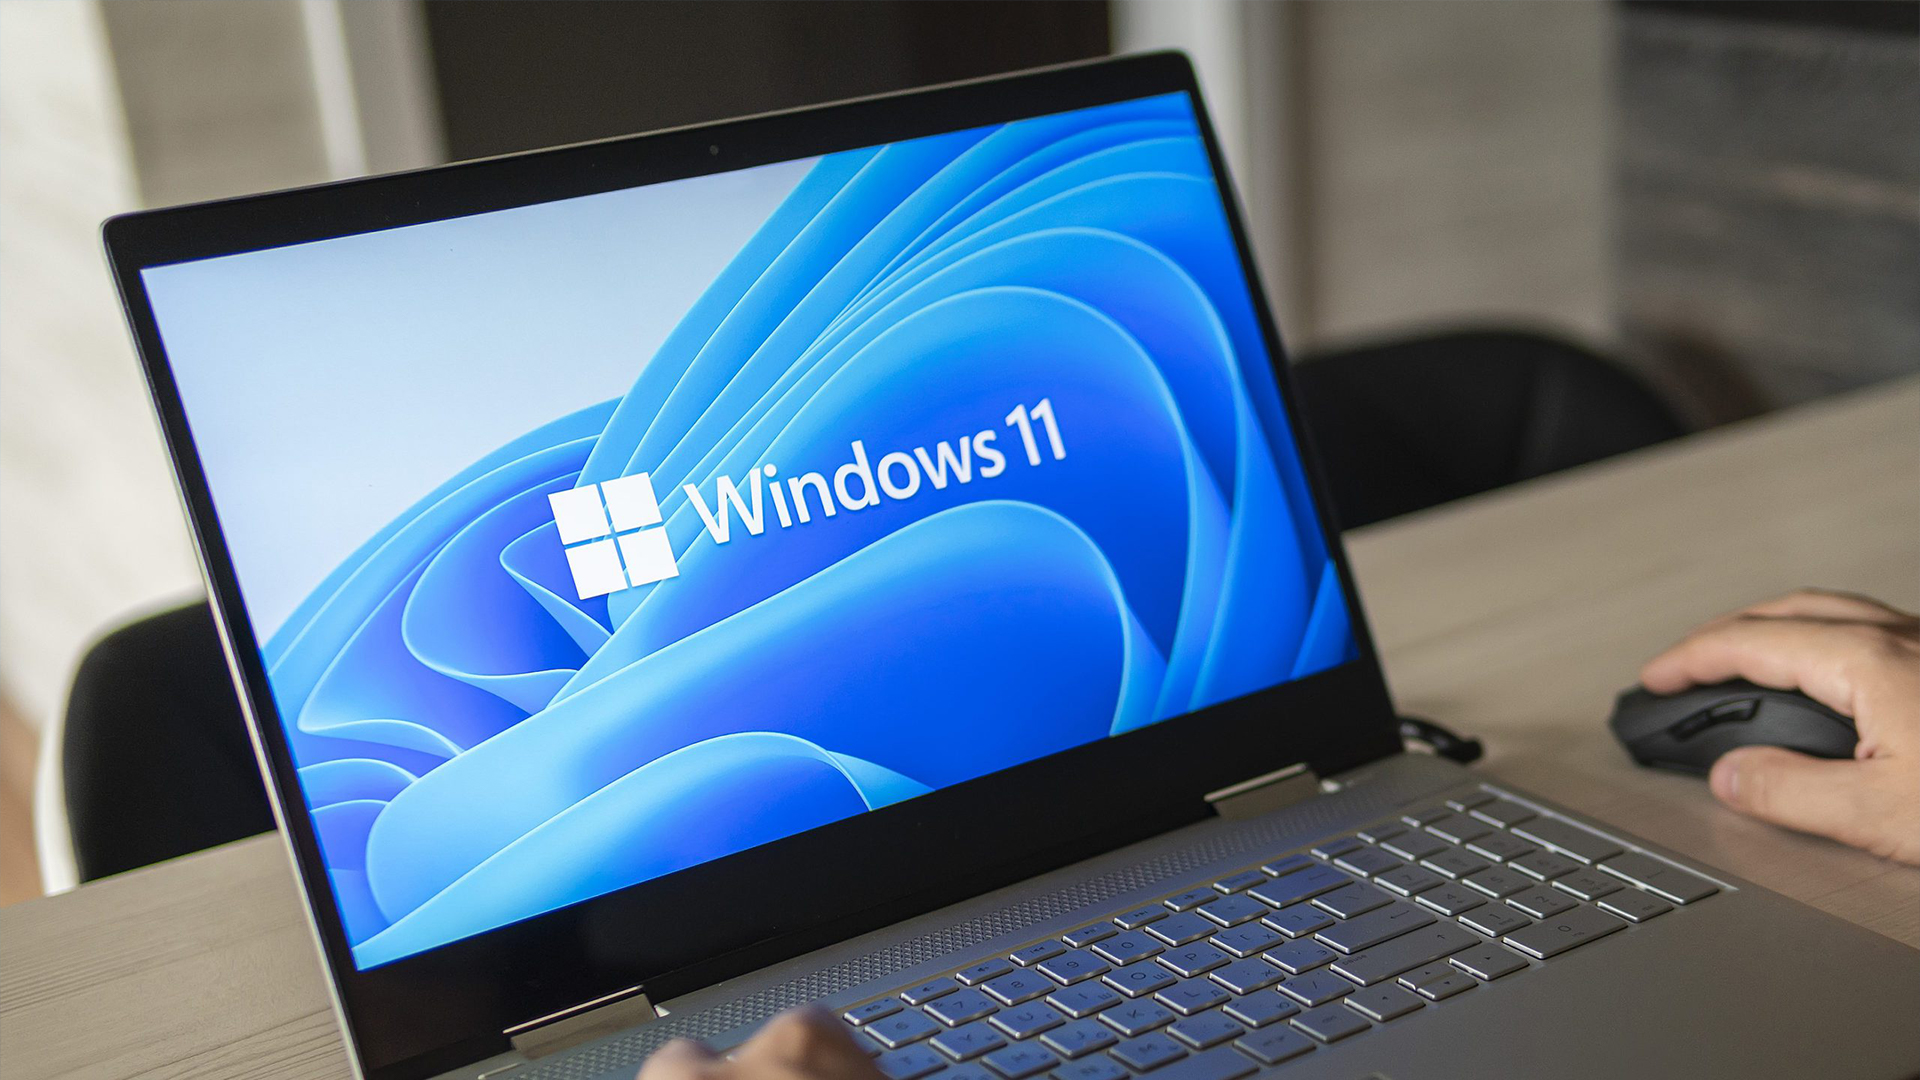 A Complete Guide on Using System Restore on Windows 11